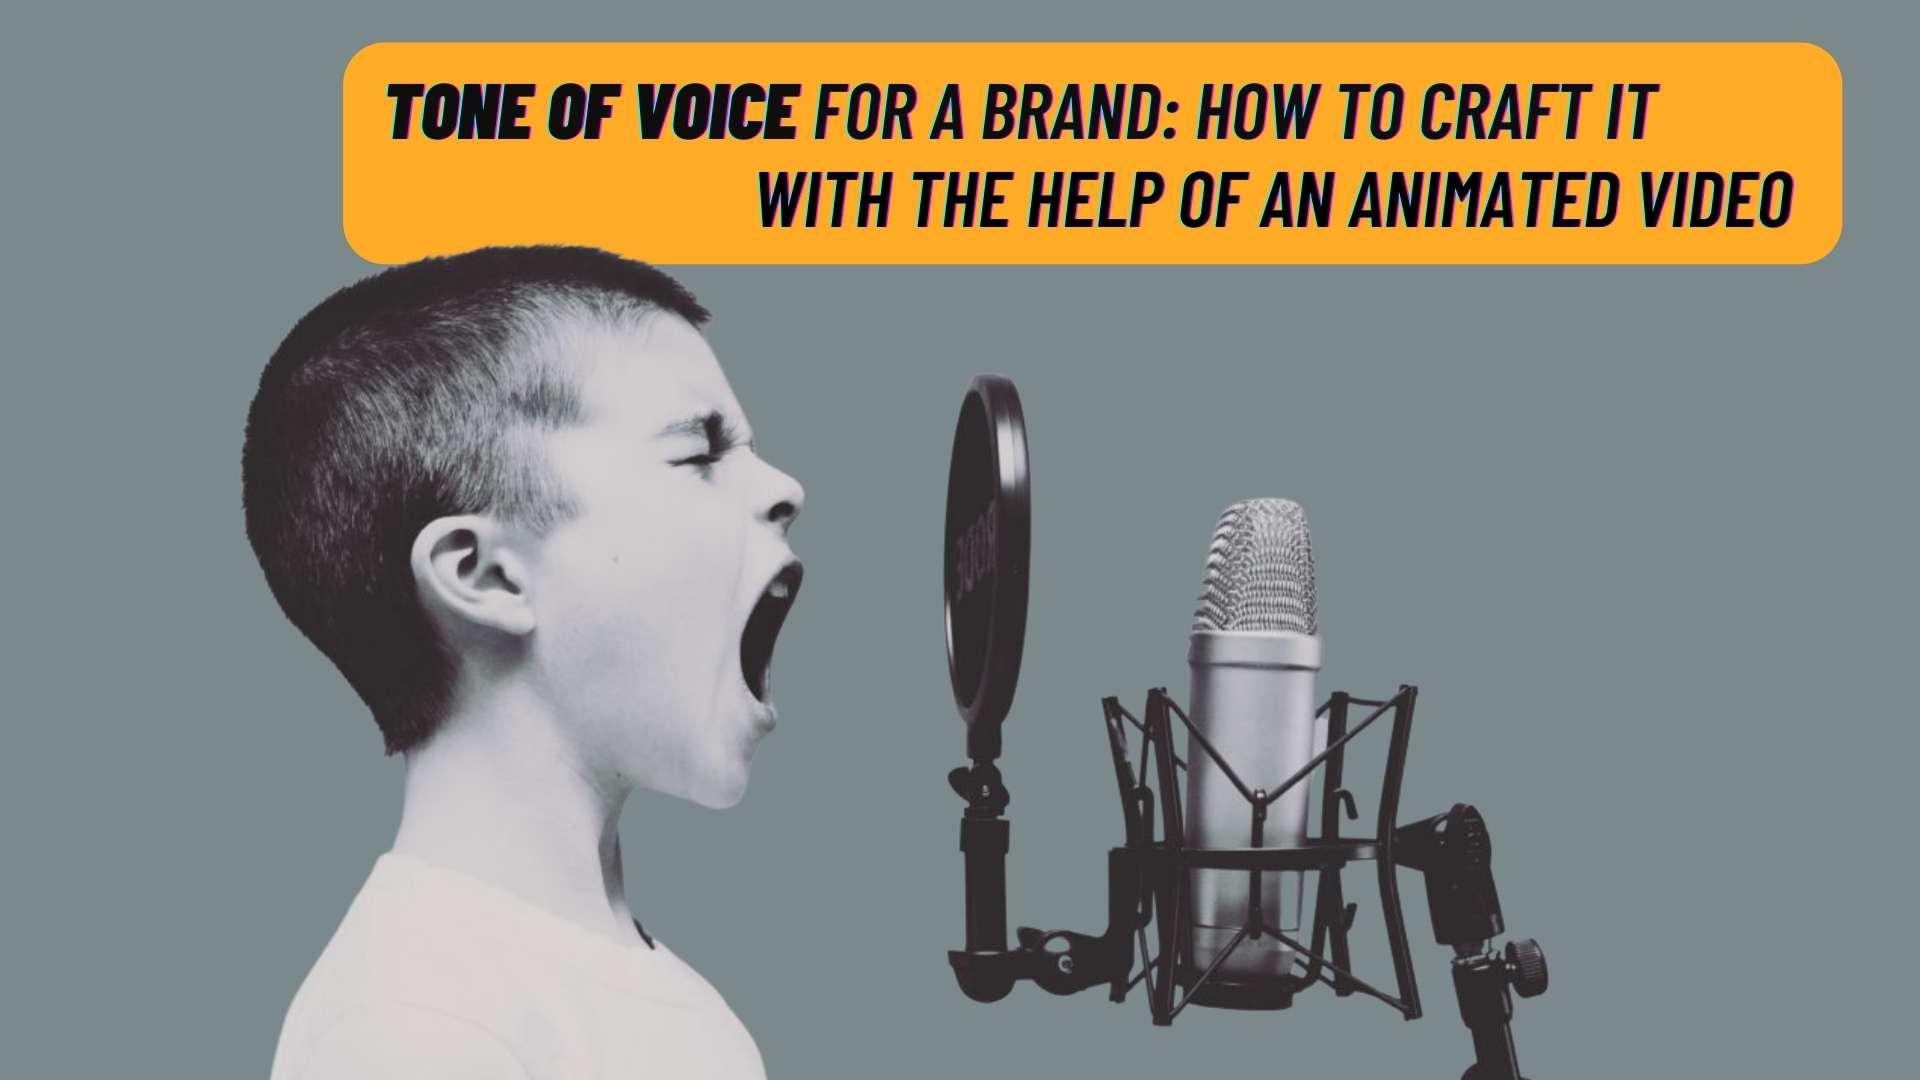 Tone of voice for a brand